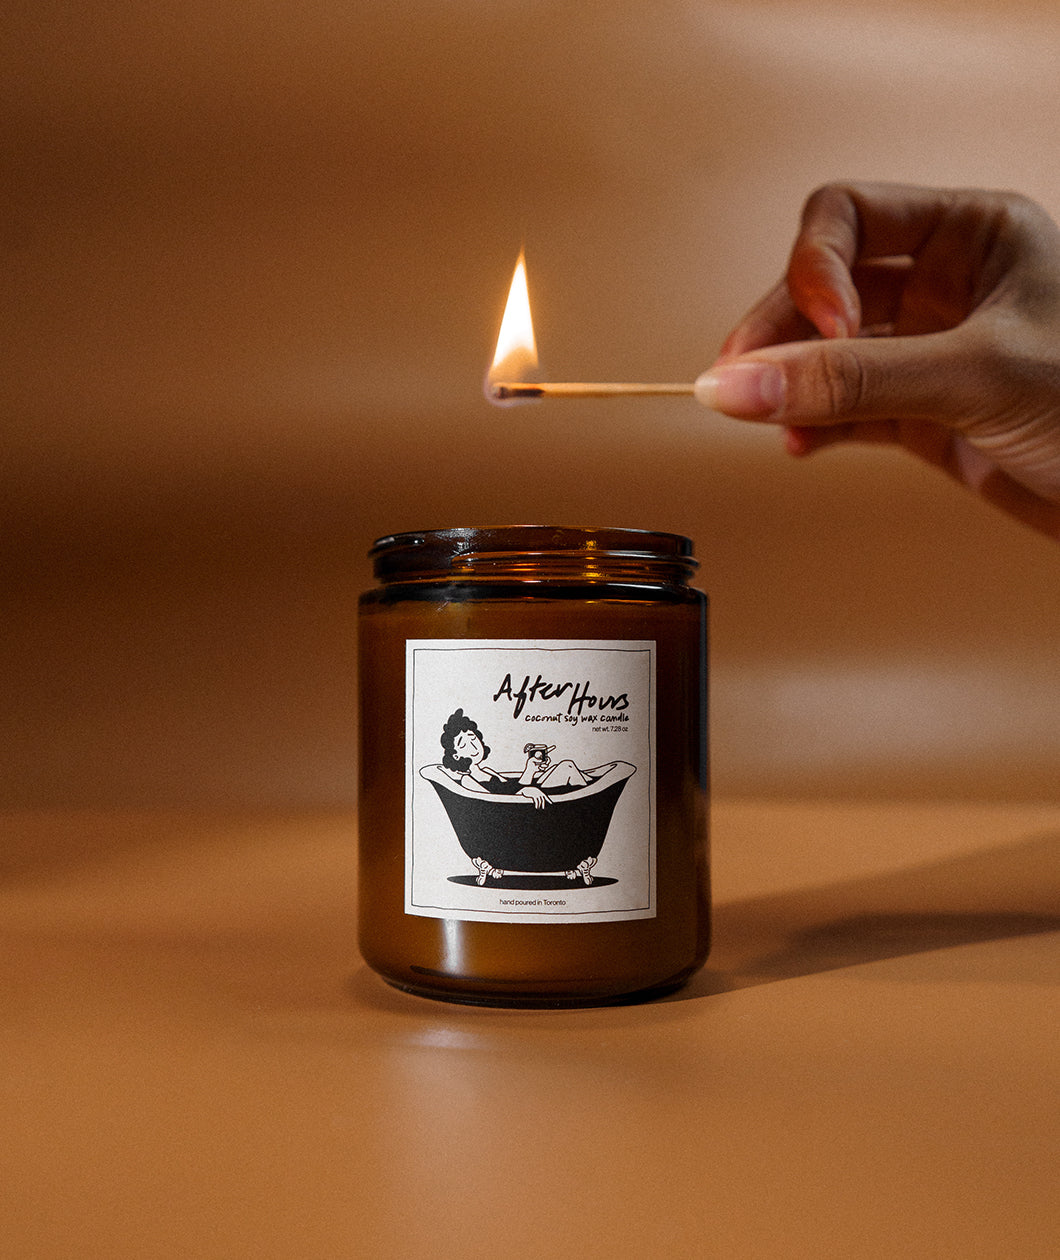 A candle about to be lit by a match. The candle’s label has a design of a person enjoying a bubble bath, with the title, “After Hours, coconut soy wax candle”. From Answer in Progress.